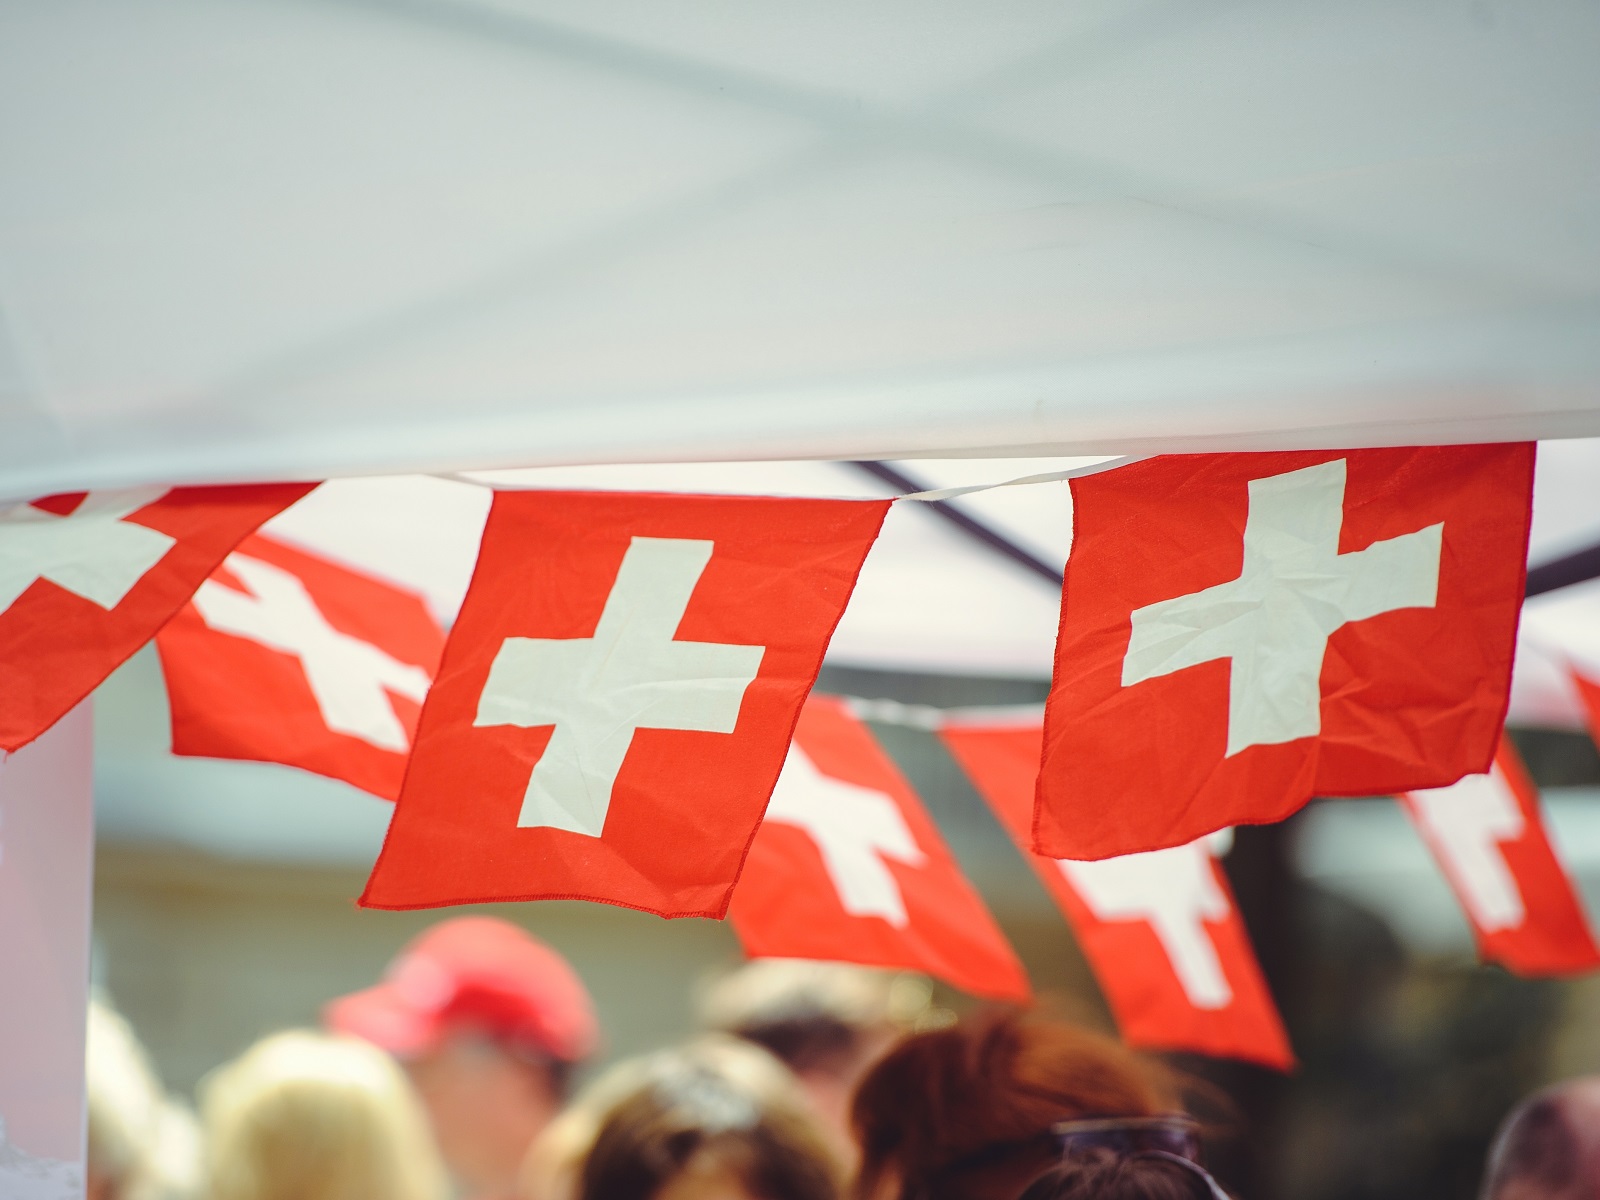 Companies Keep Flocking to Swiss Crypto Valley, Over 1,000 Jobs Added in a Year